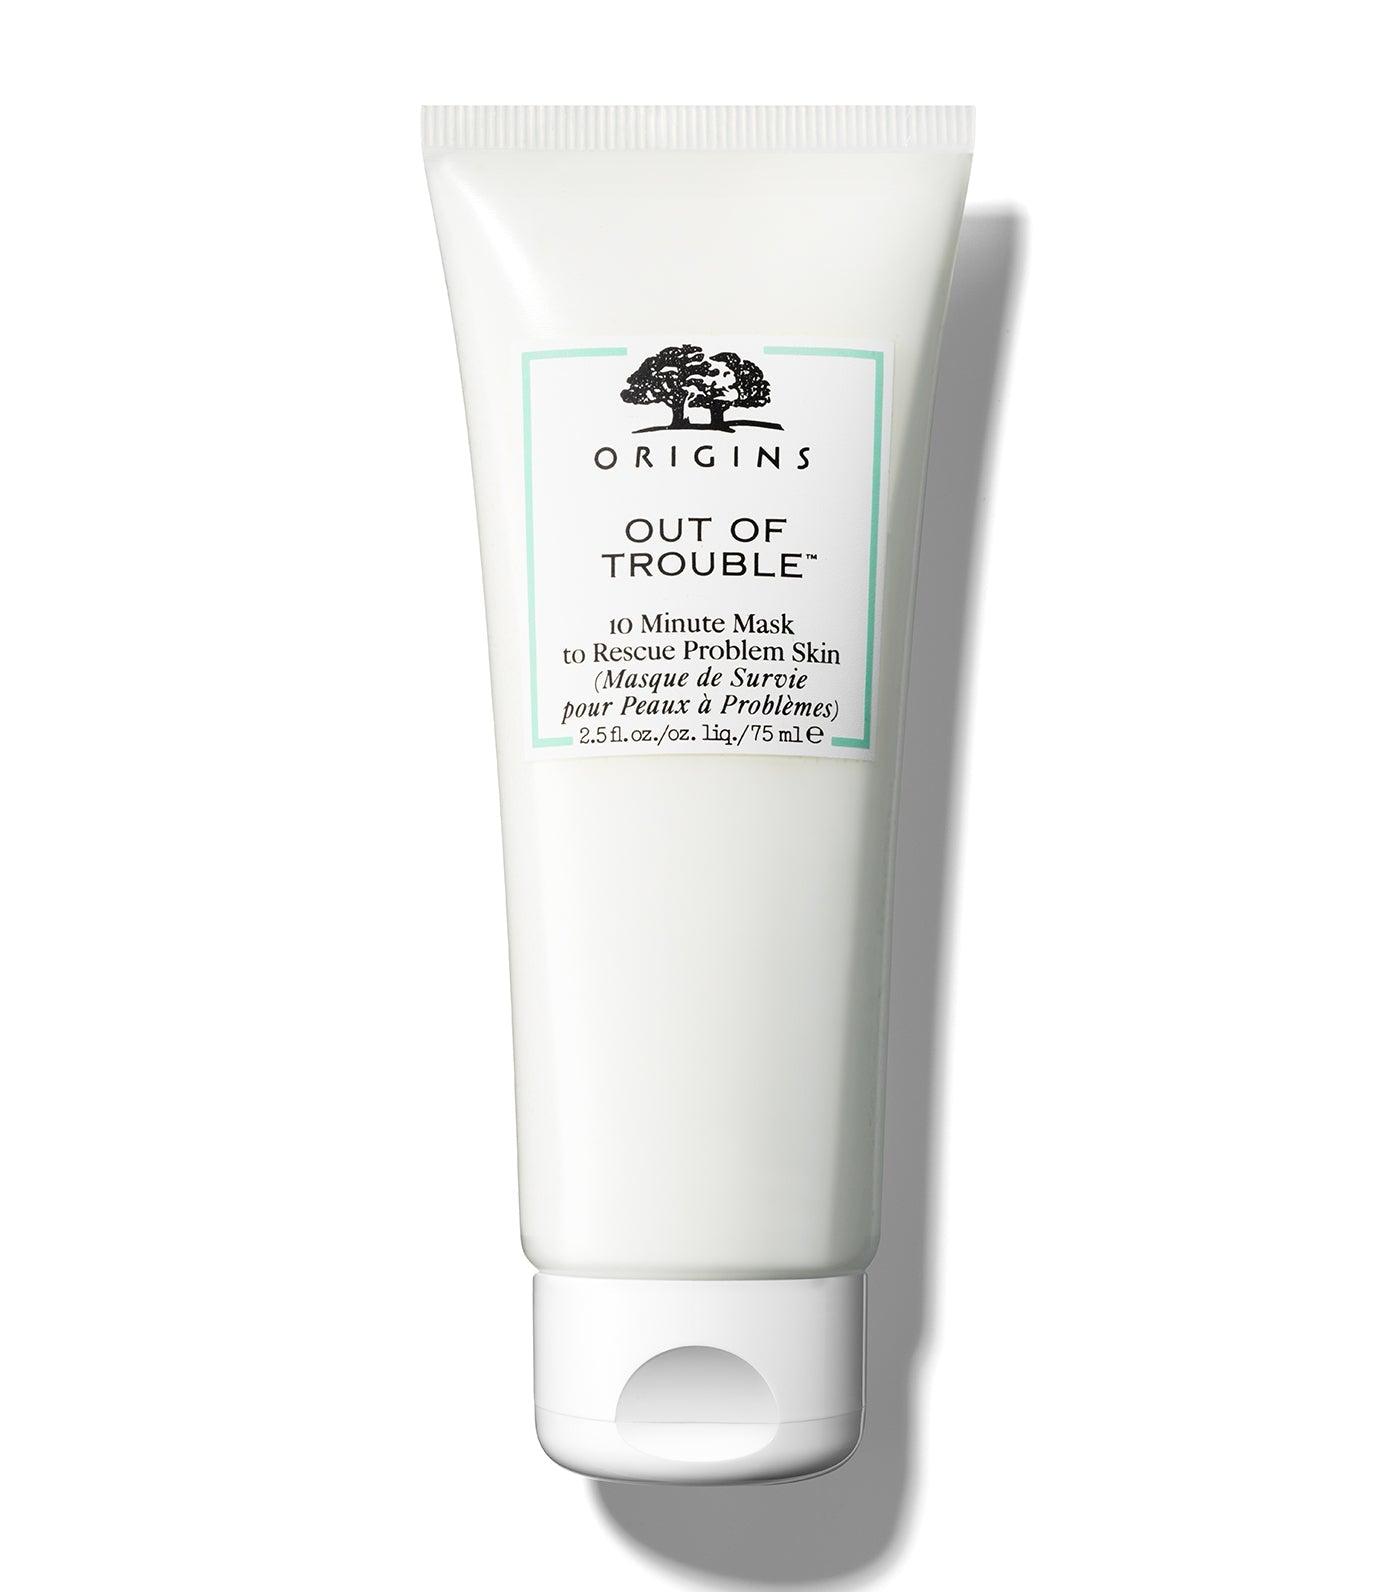 Out of Trouble, 10-Minute Mask to Rescue Problem Skin